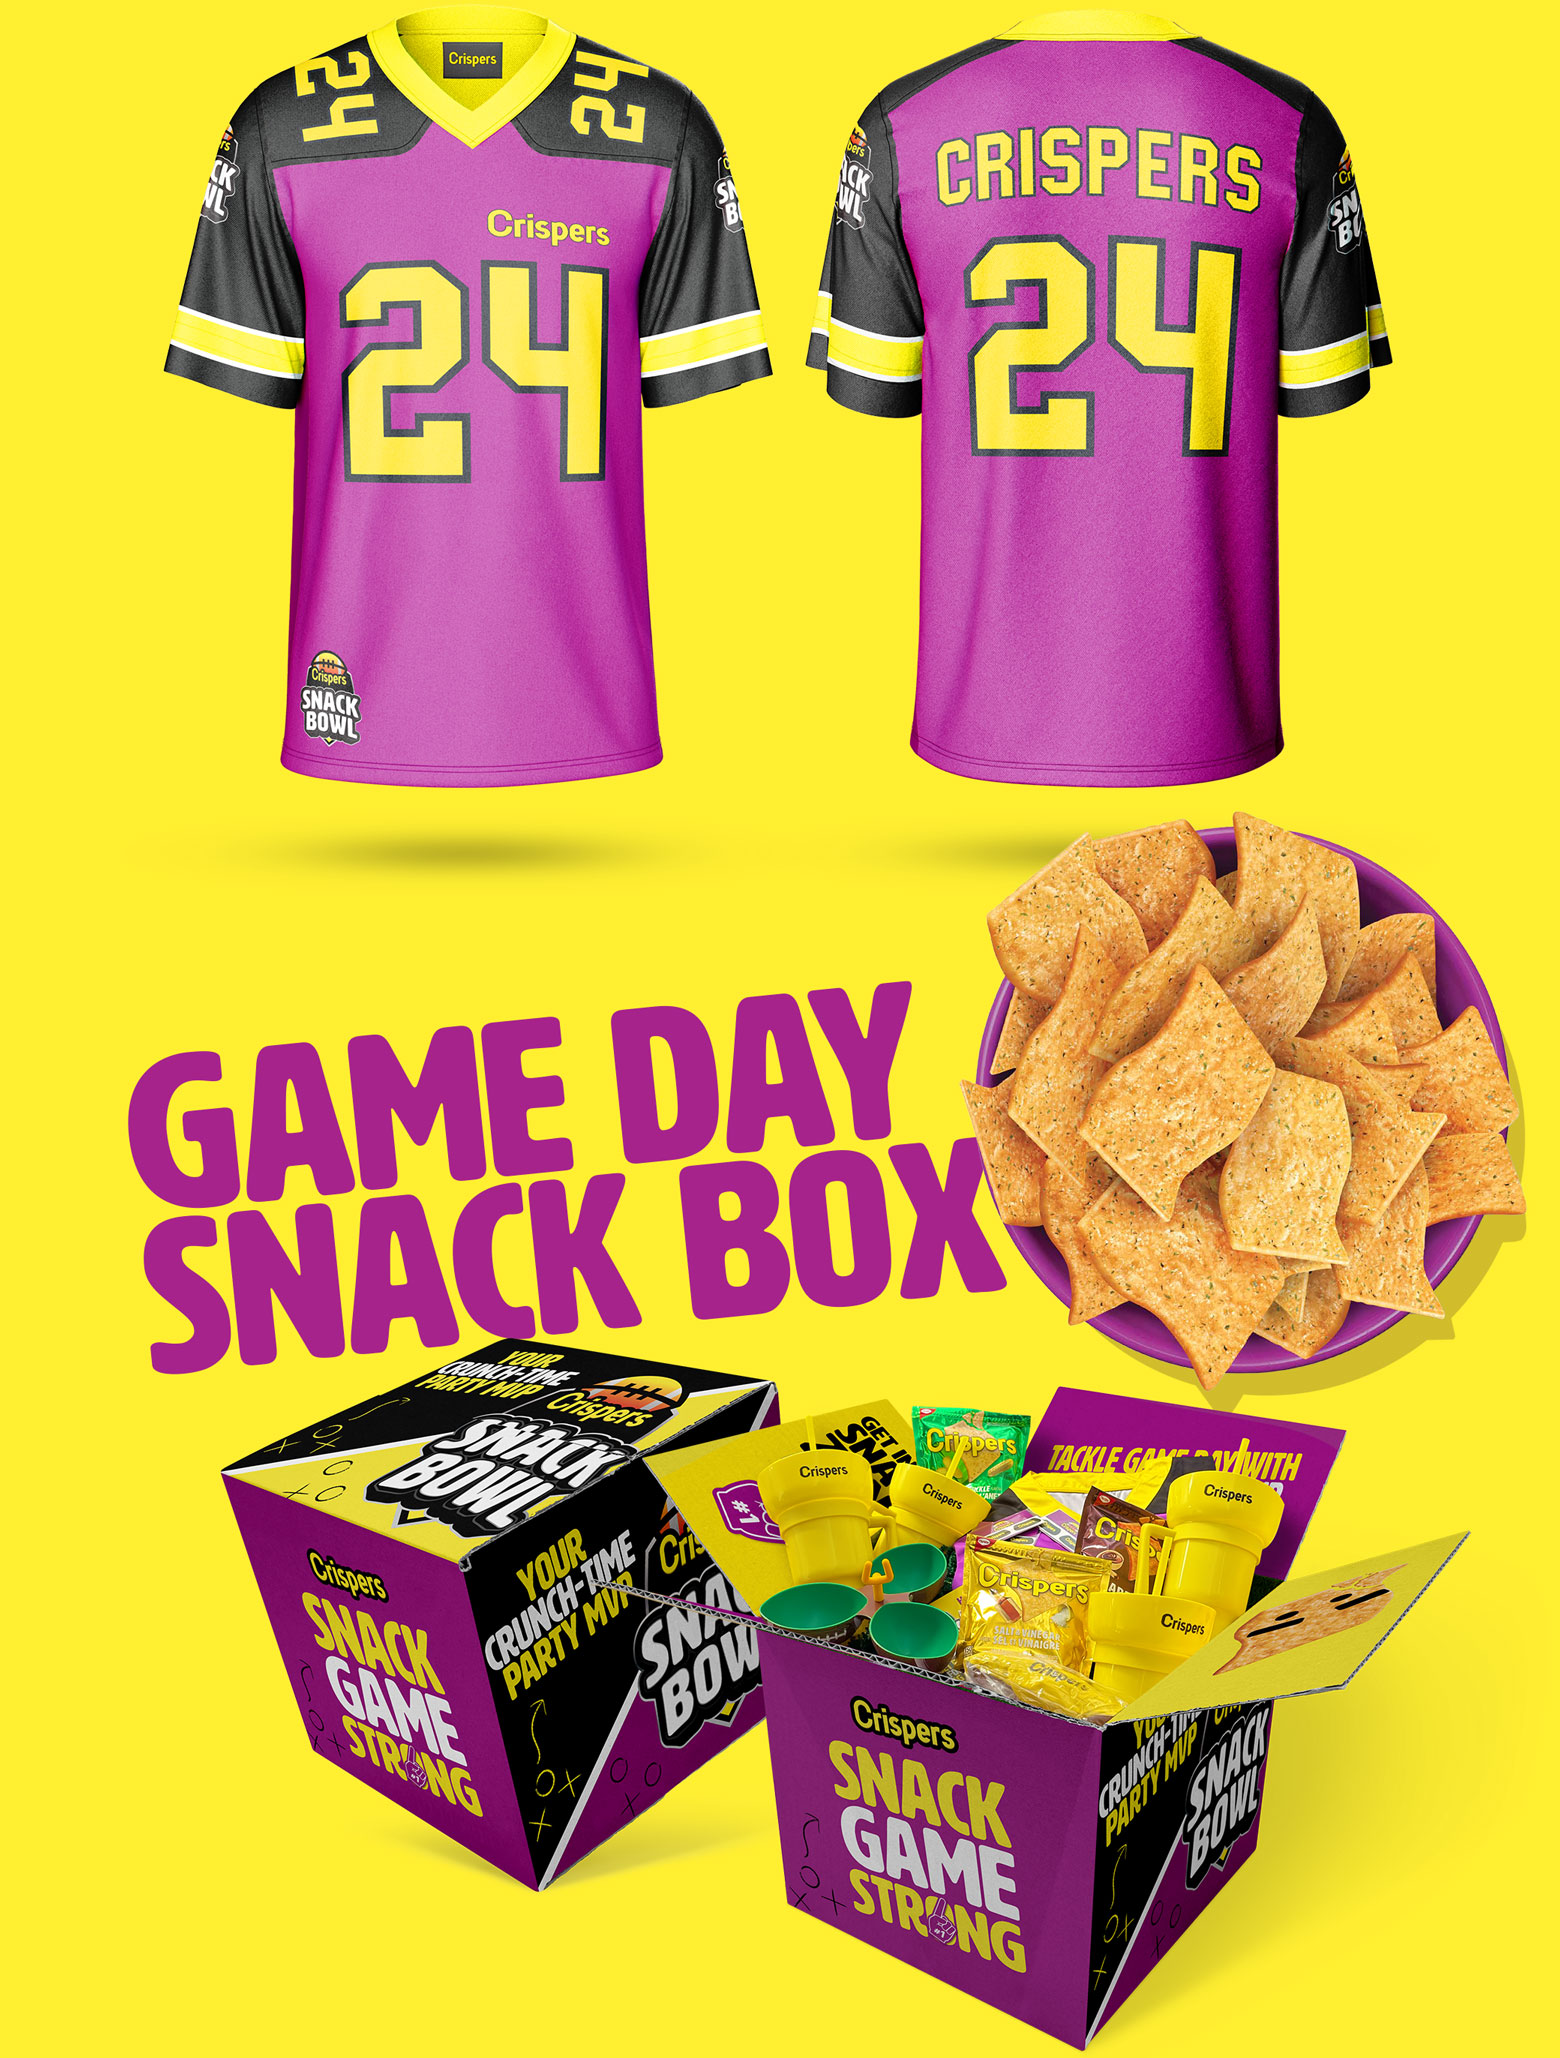 Crispers Jersey and Game Day Snack Box